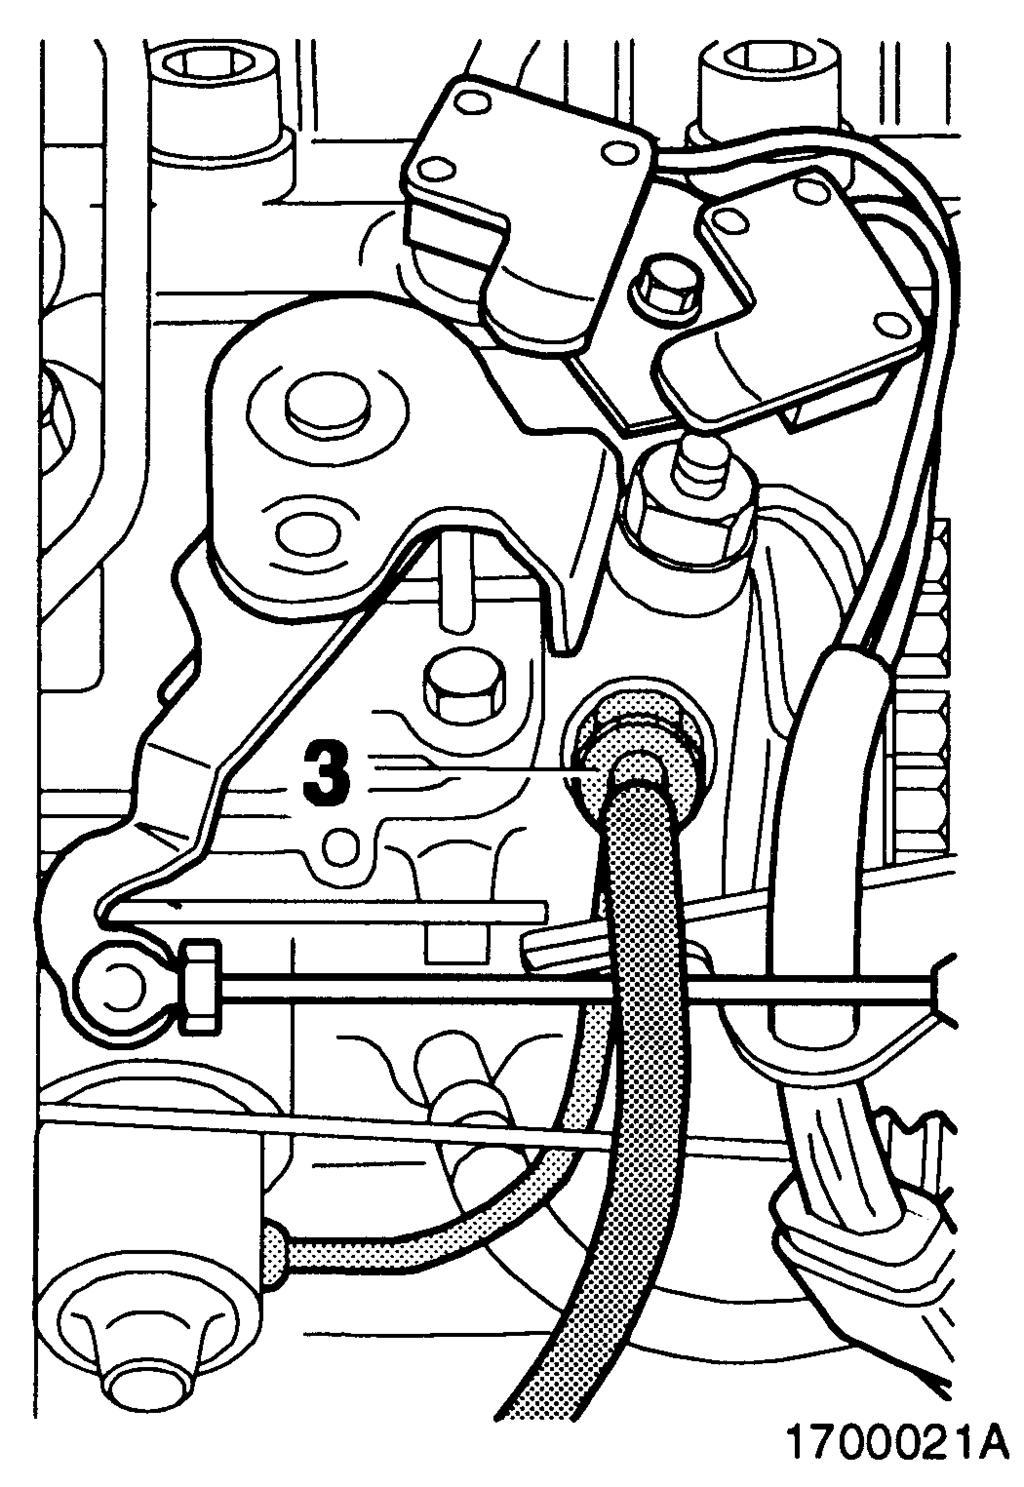 Bleed the fuel system. Place a container under the pump. Connect a hose to the bleeder screw (3) and let it hang down into the container. Open the bleeder screw.